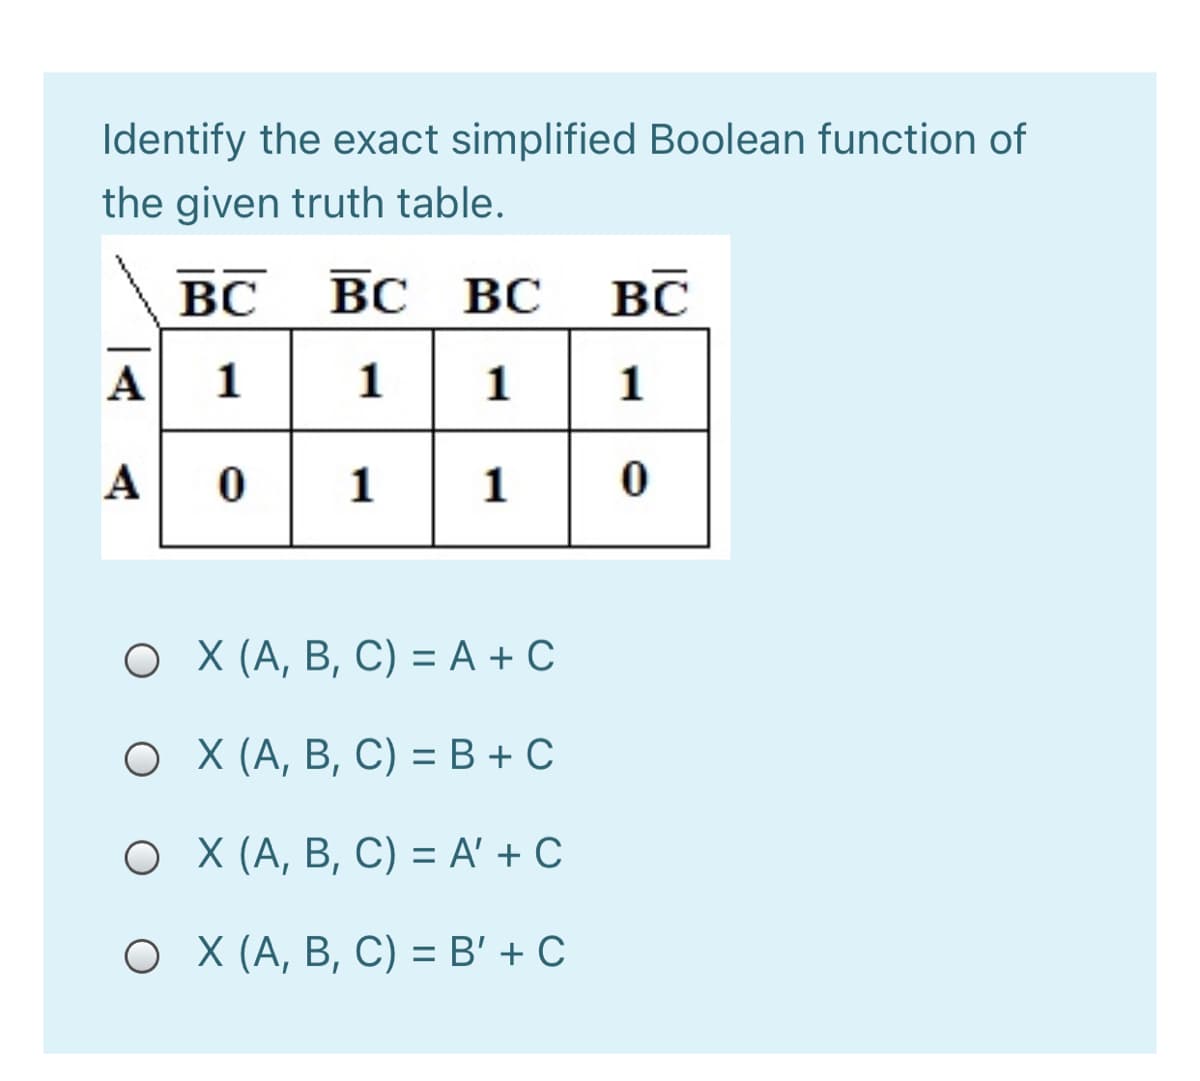 Identify the exact simplified Boolean function of
the given truth table.
ВС ВС Вс
BC
BC
А 1
1 1
1
А
1
1
о Х (А, В, С) %3D А + С
о Х (А, В, С) %3D В + С
О Х (А, В, С) 3D А' + C
о Х (А, В, С) %3D В'+ С
